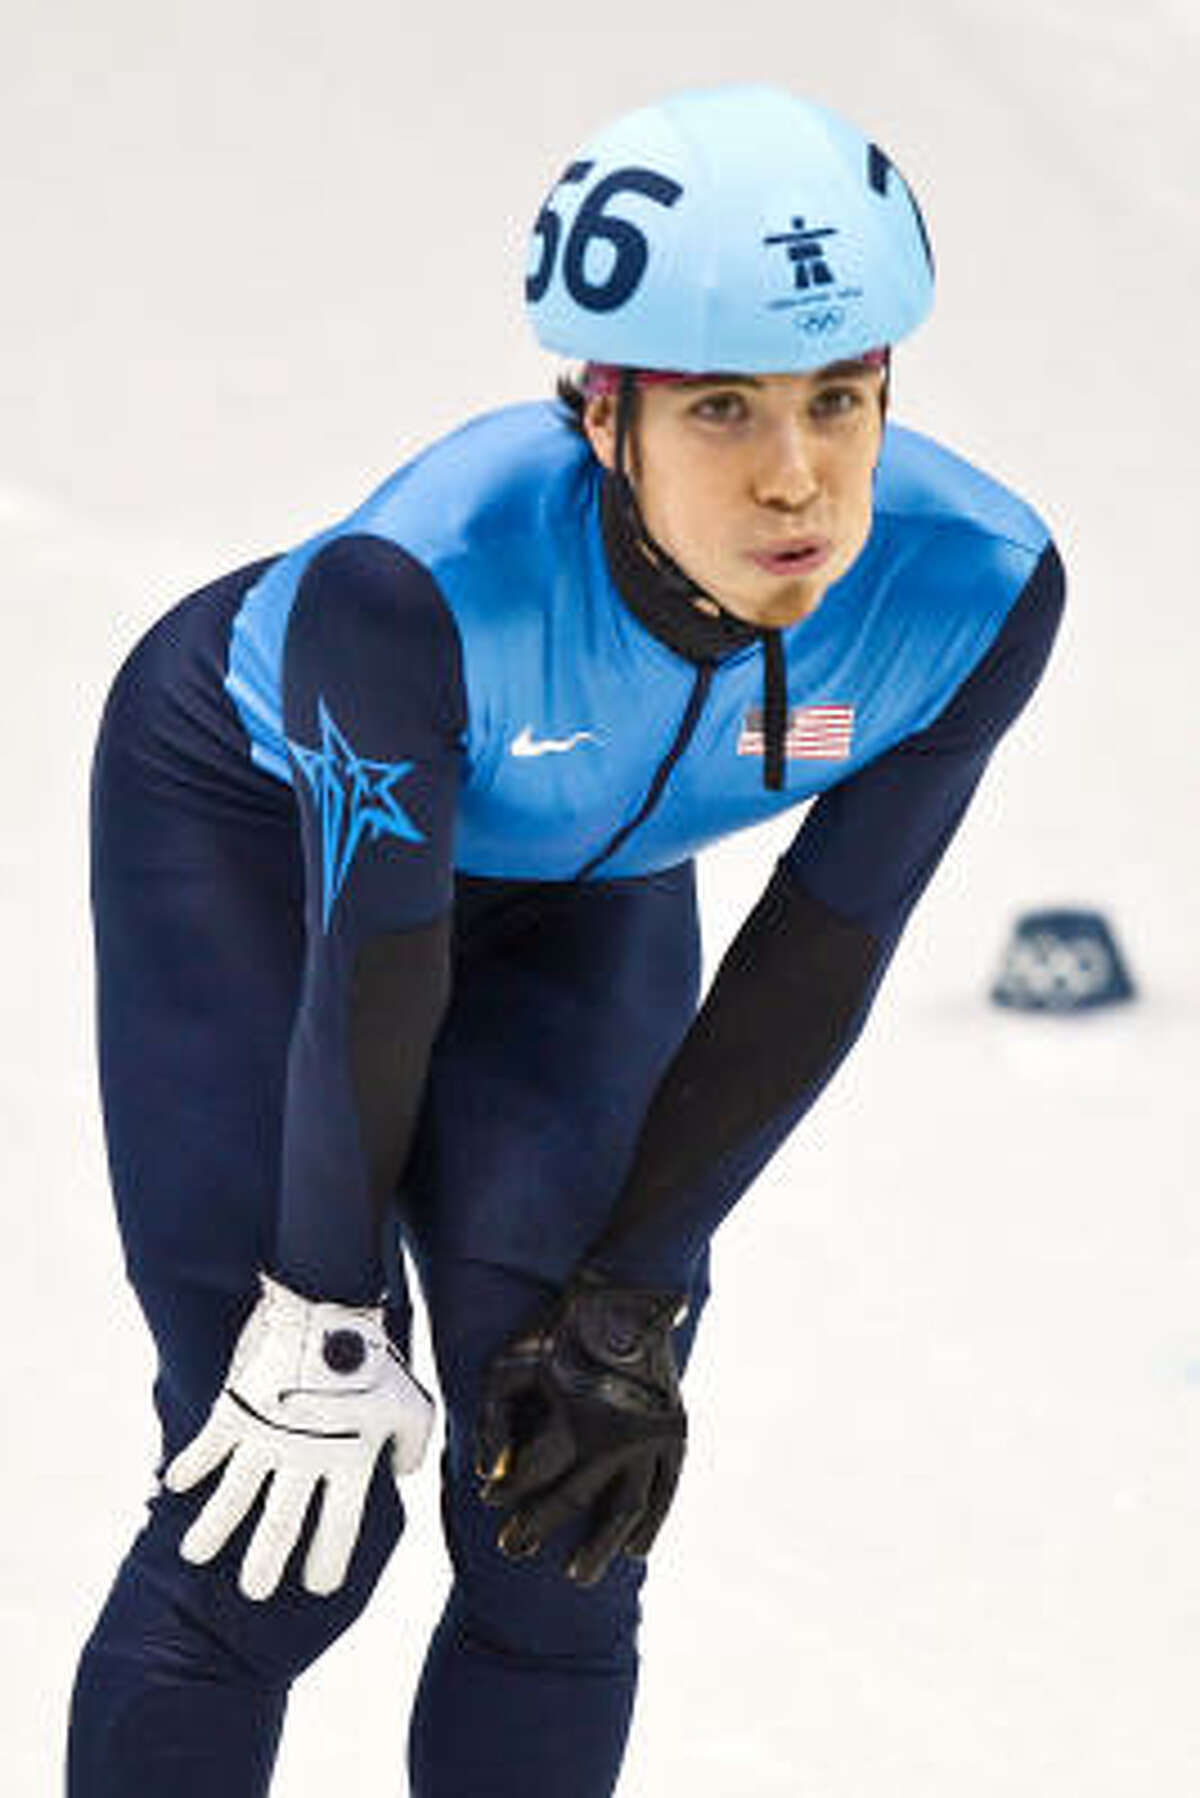 Apolo Anton Ohno was somewhat downcast after being disqualified in the men's 500-meter finals.